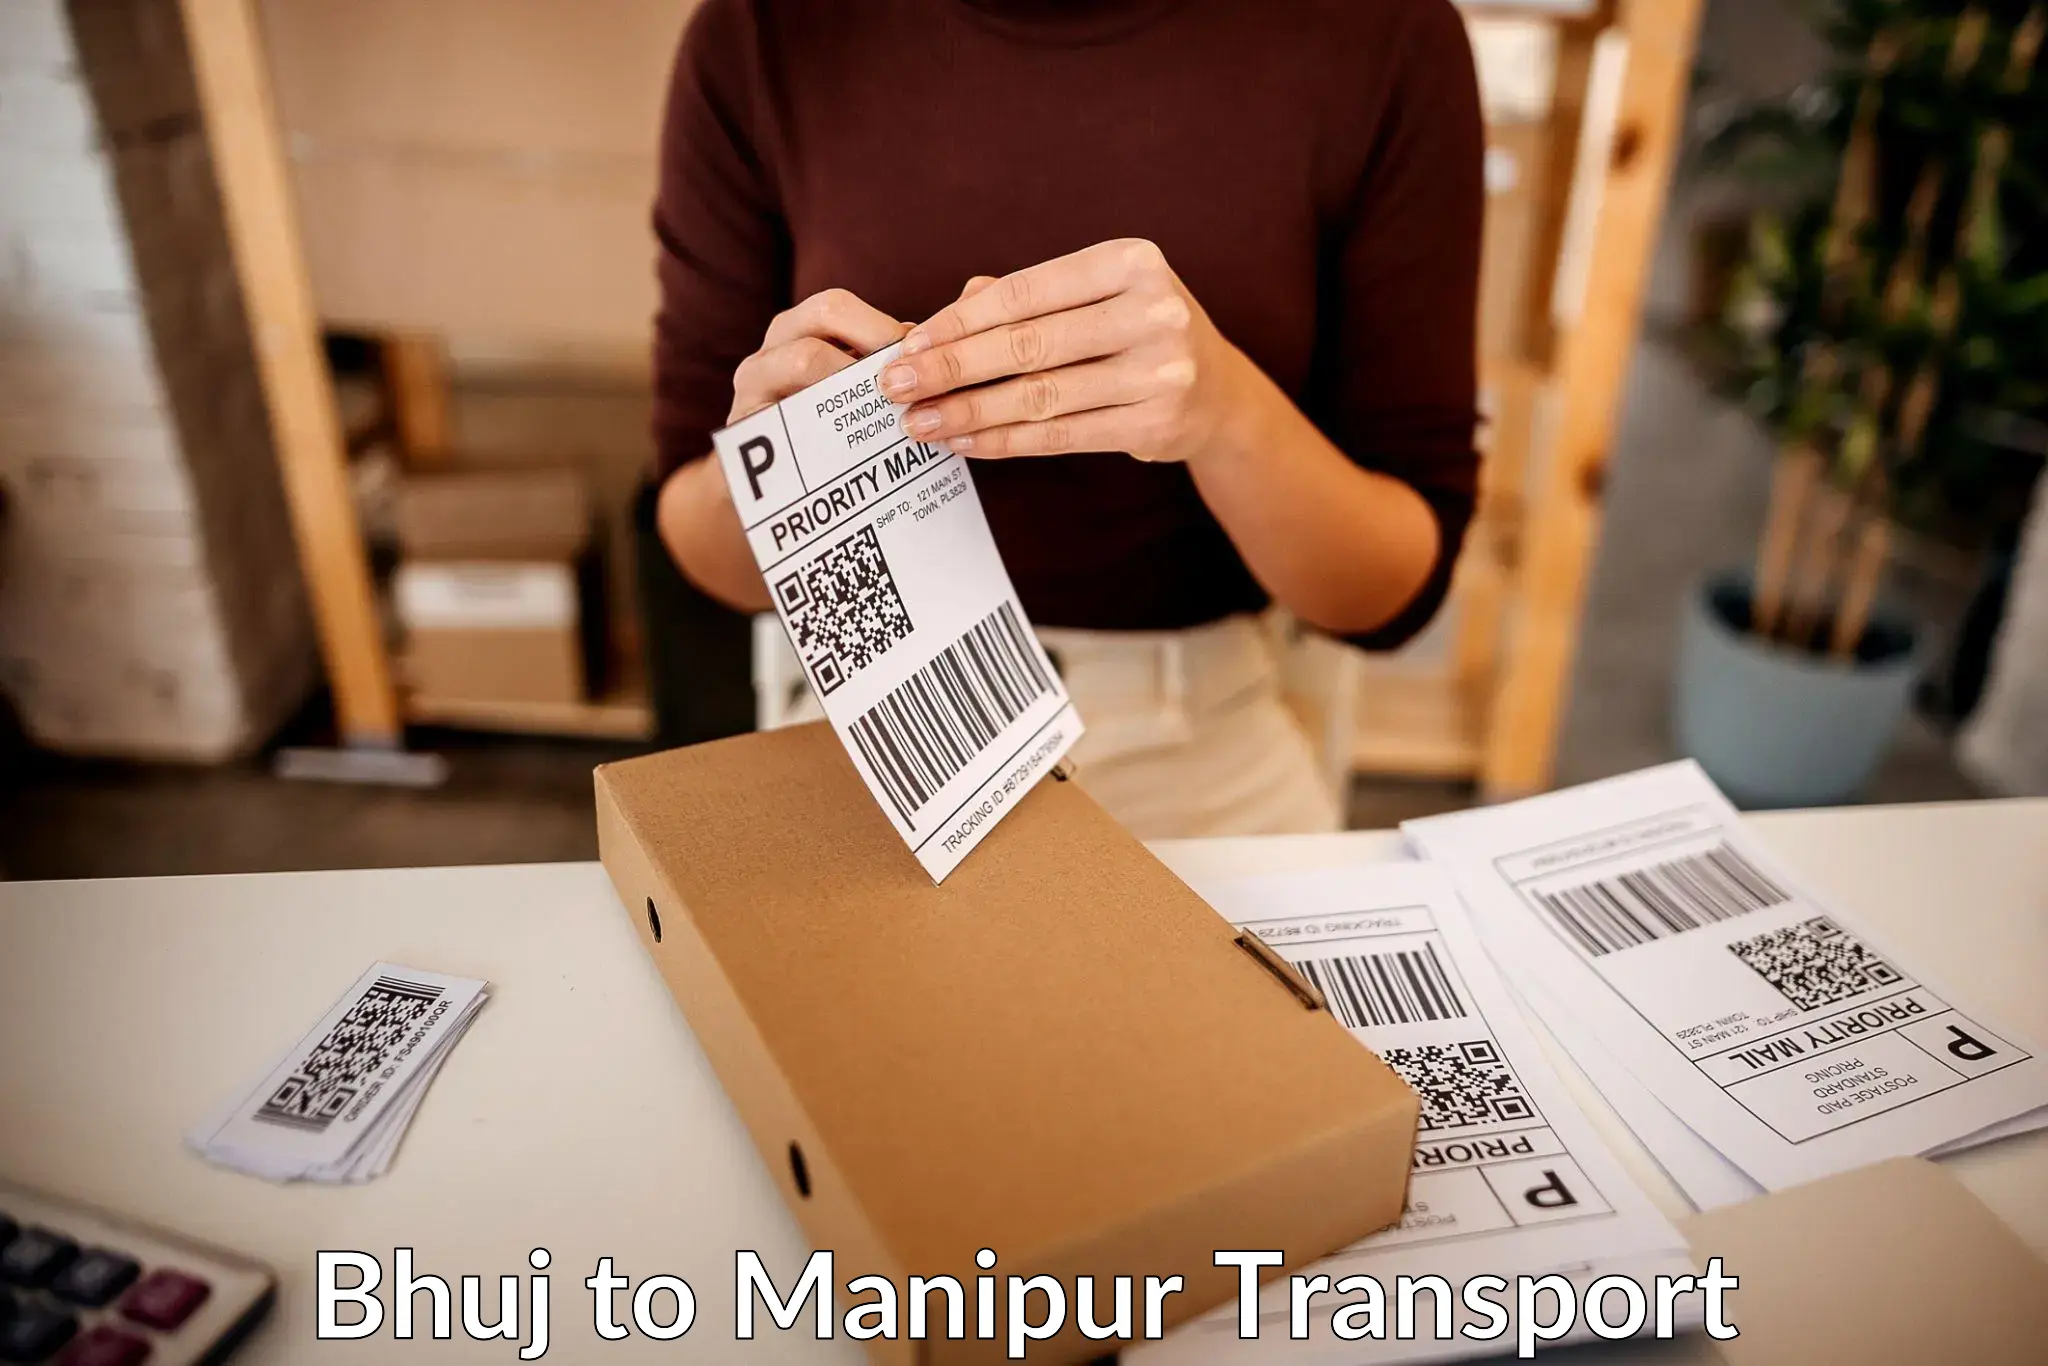 Container transport service Bhuj to Chandel